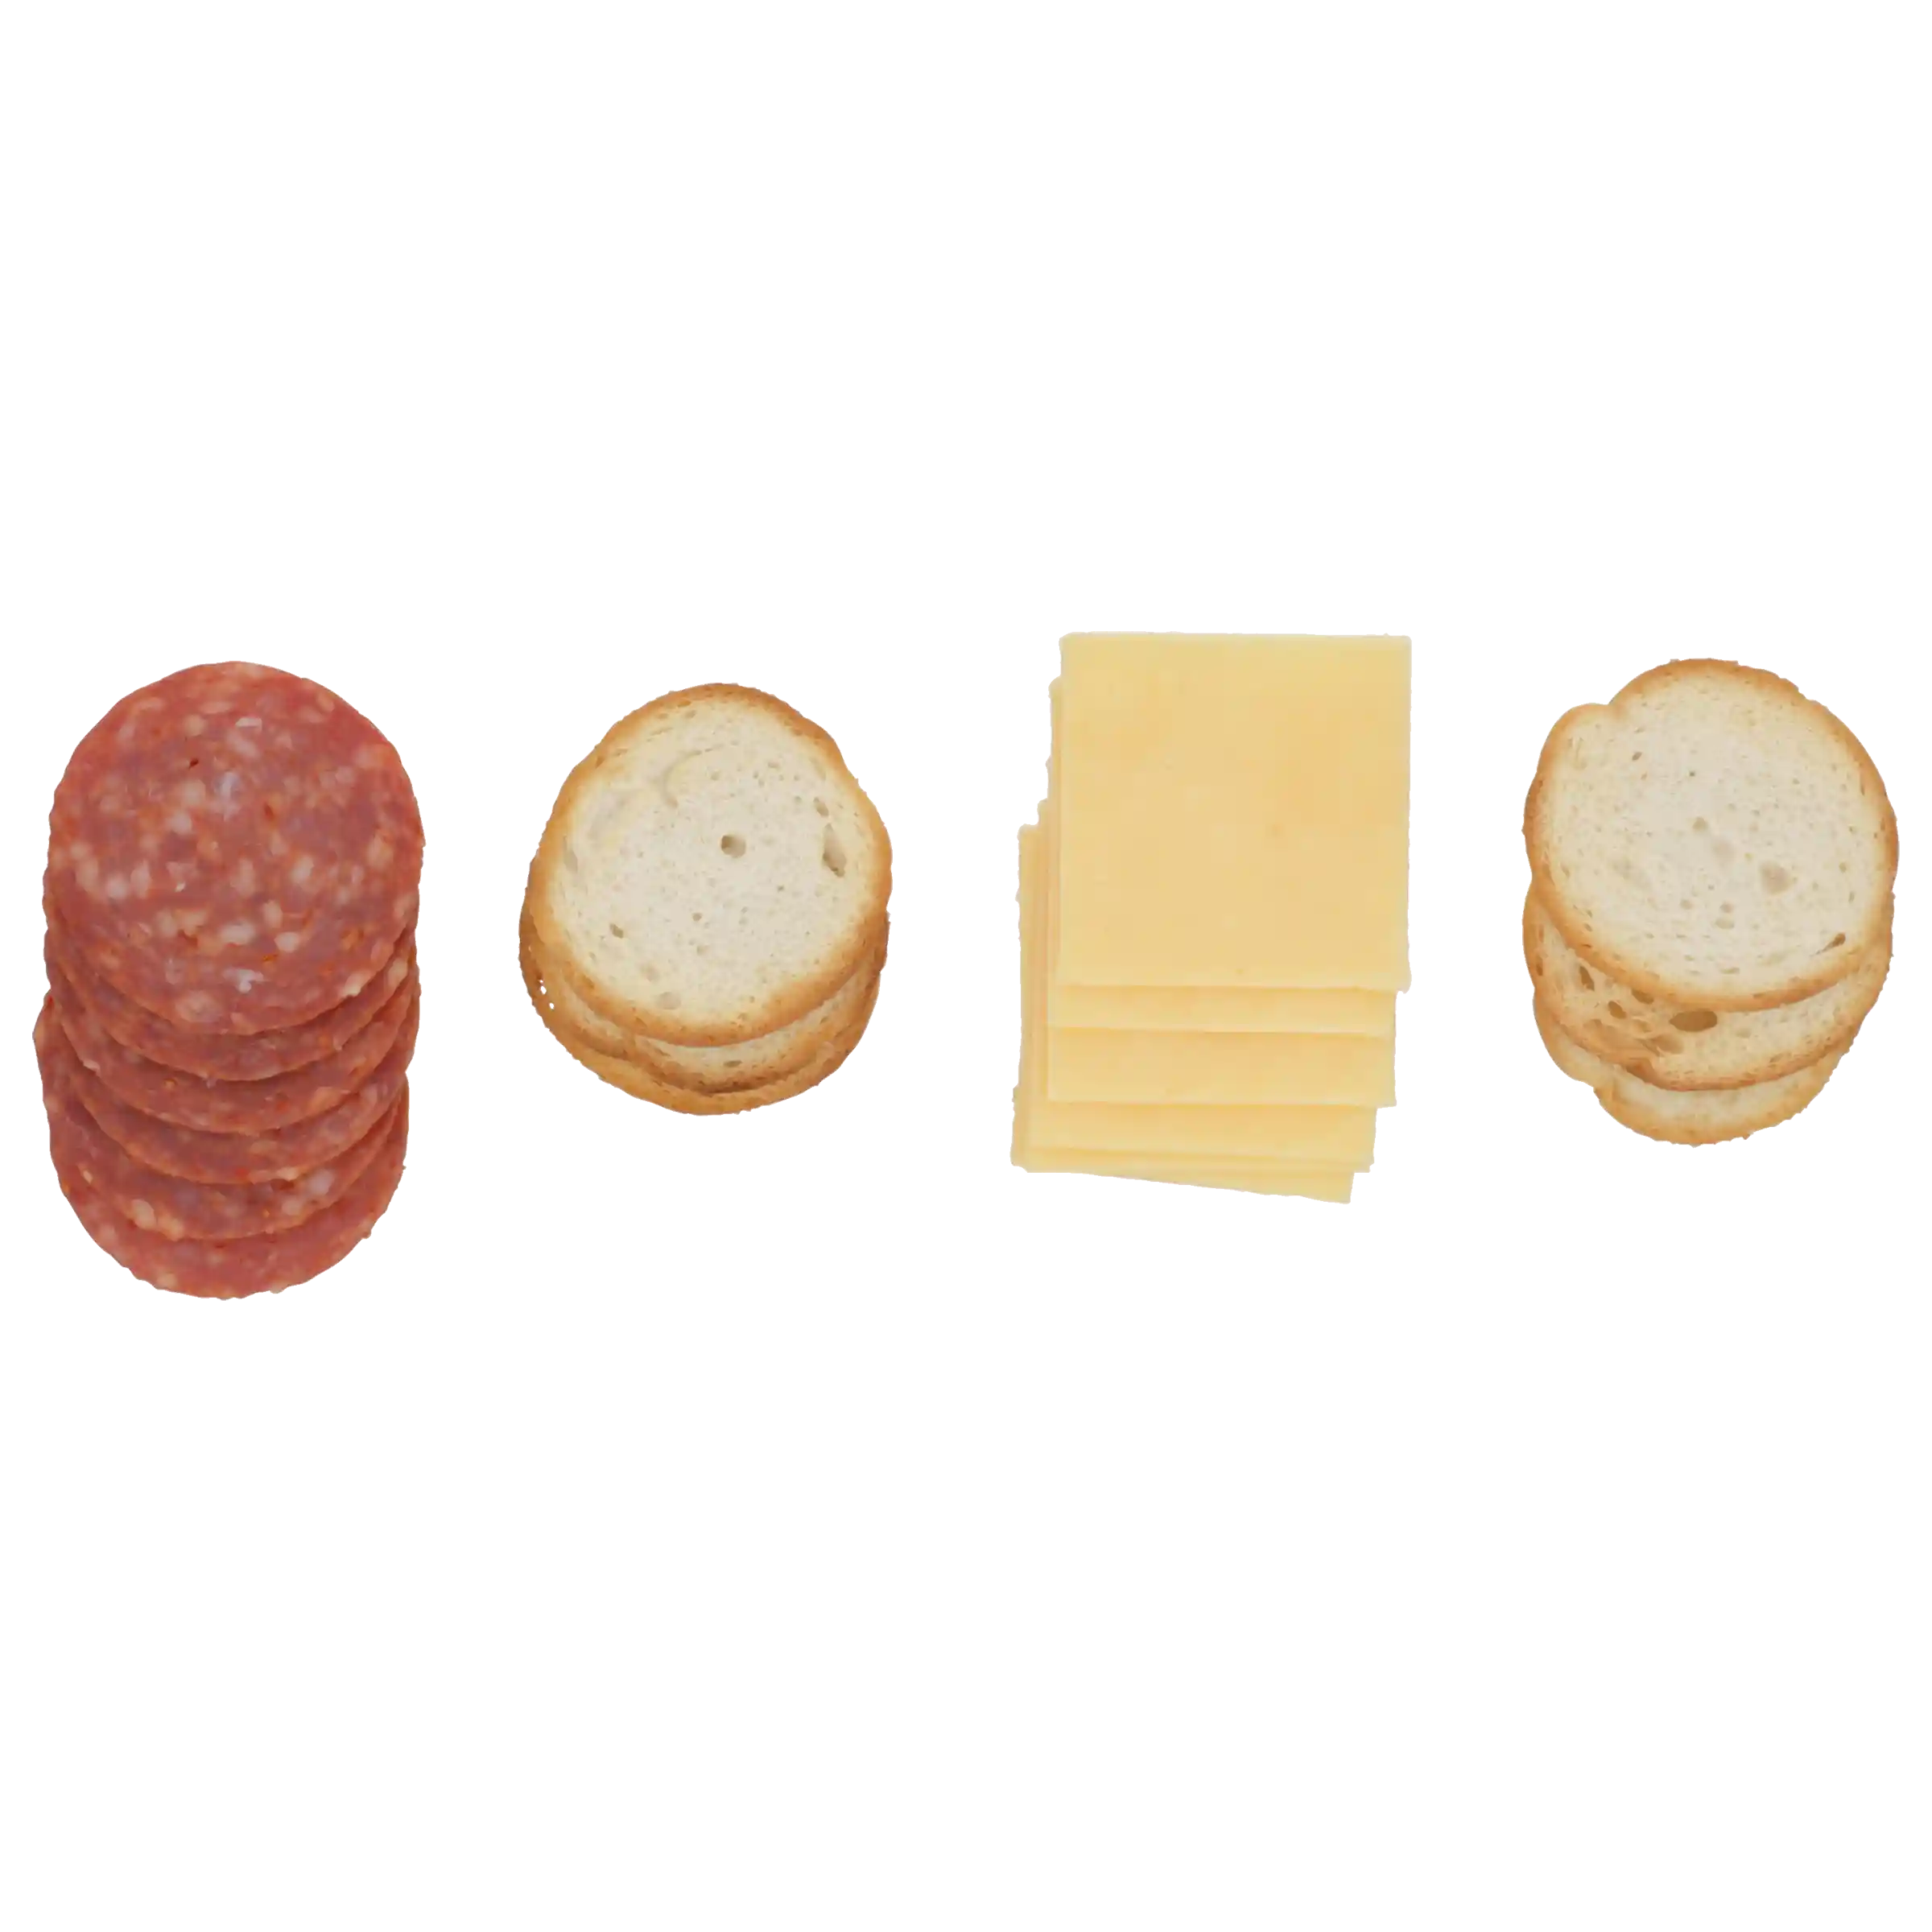 Hillshire® Snacking Small Plates, Hot Calabrese Salame Deli Lunch Meat with Gouda Cheese, 2.76 ozhttps://images.salsify.com/image/upload/s--Cgkka0kQ--/q_25/t6kkq7lnzhar41nukem7.webp